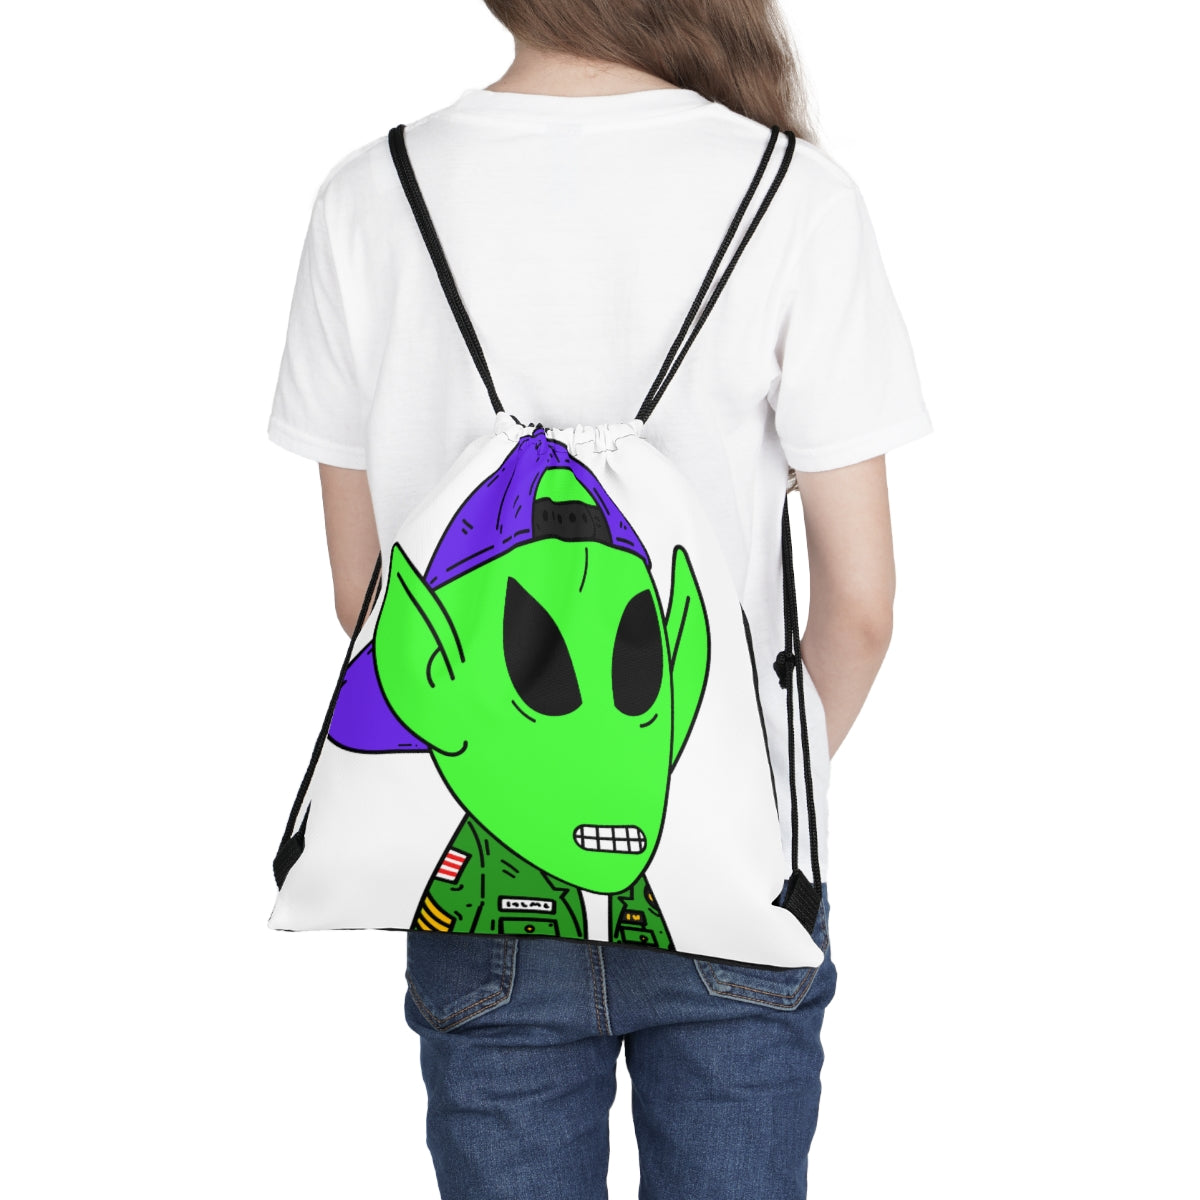 Green Military Army Jacket pointy ear Visitor Alien Outdoor Drawstring Bag